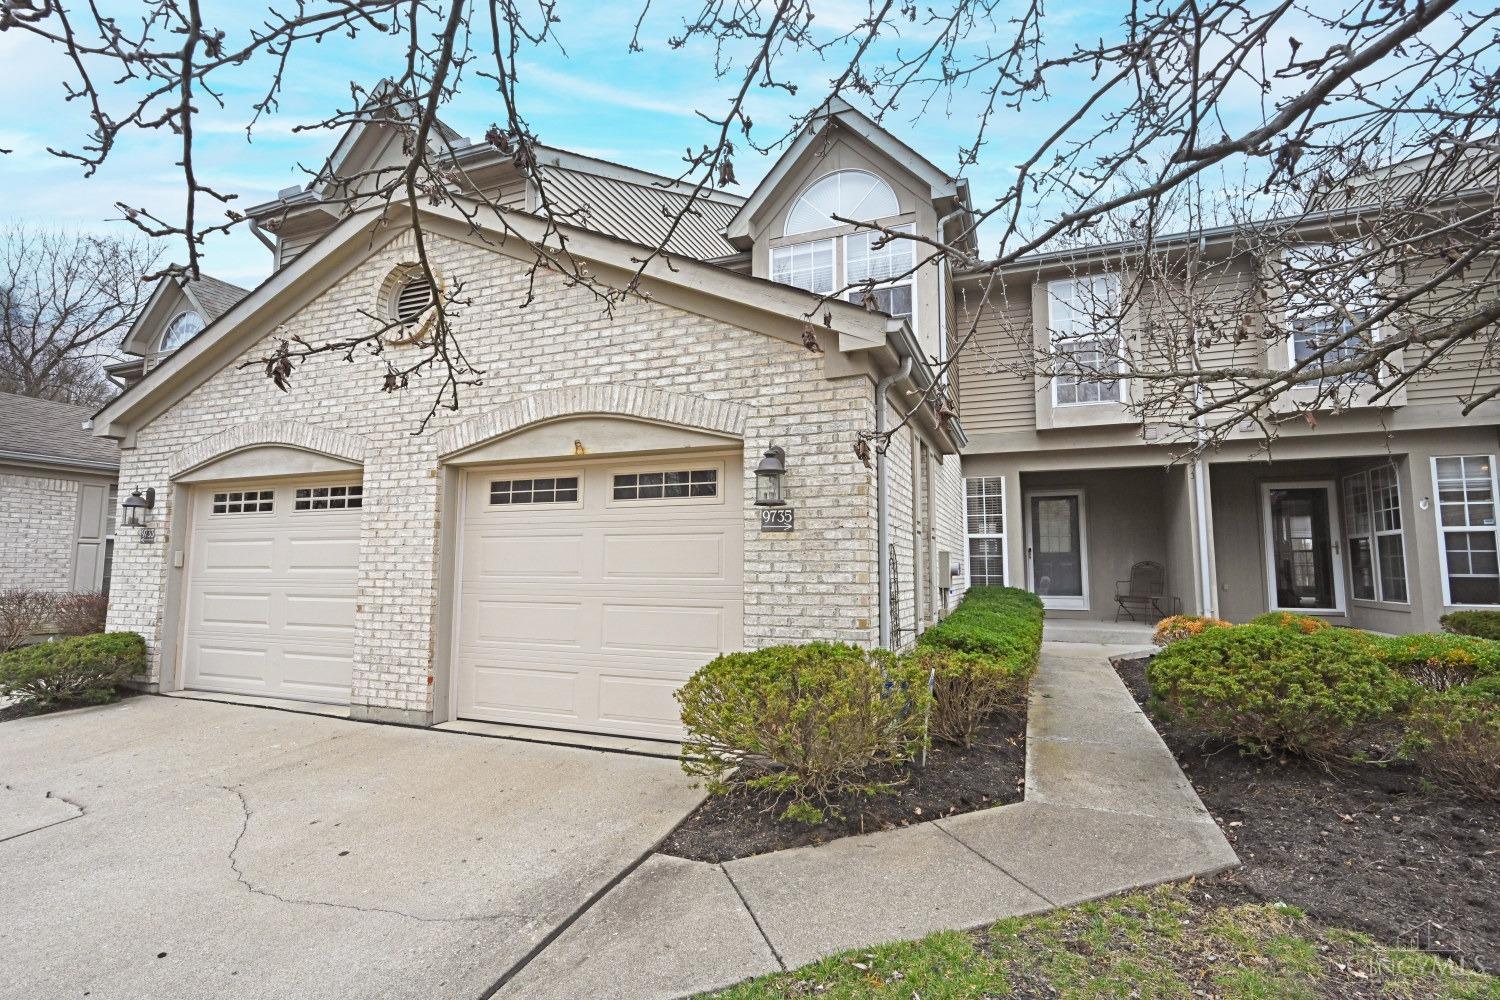 9735 Troon, Blue Ash, OH 45241